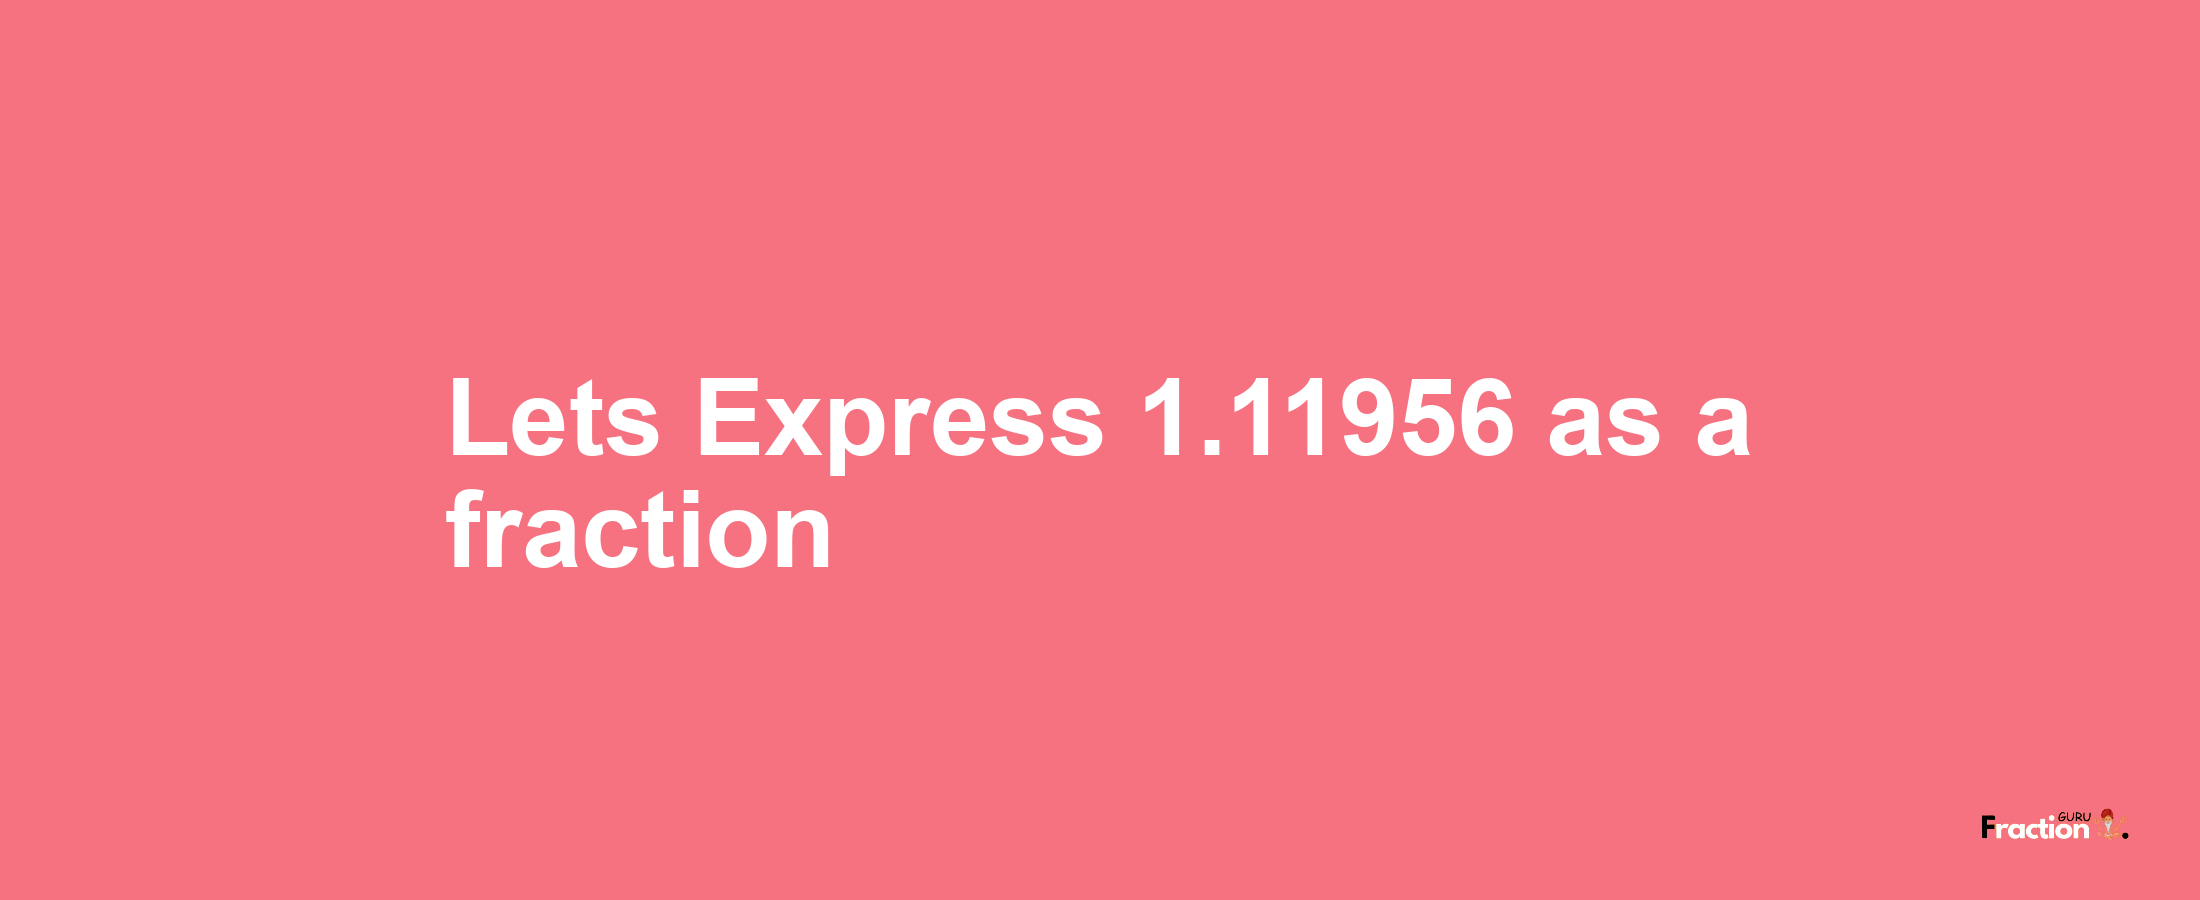 Lets Express 1.11956 as afraction